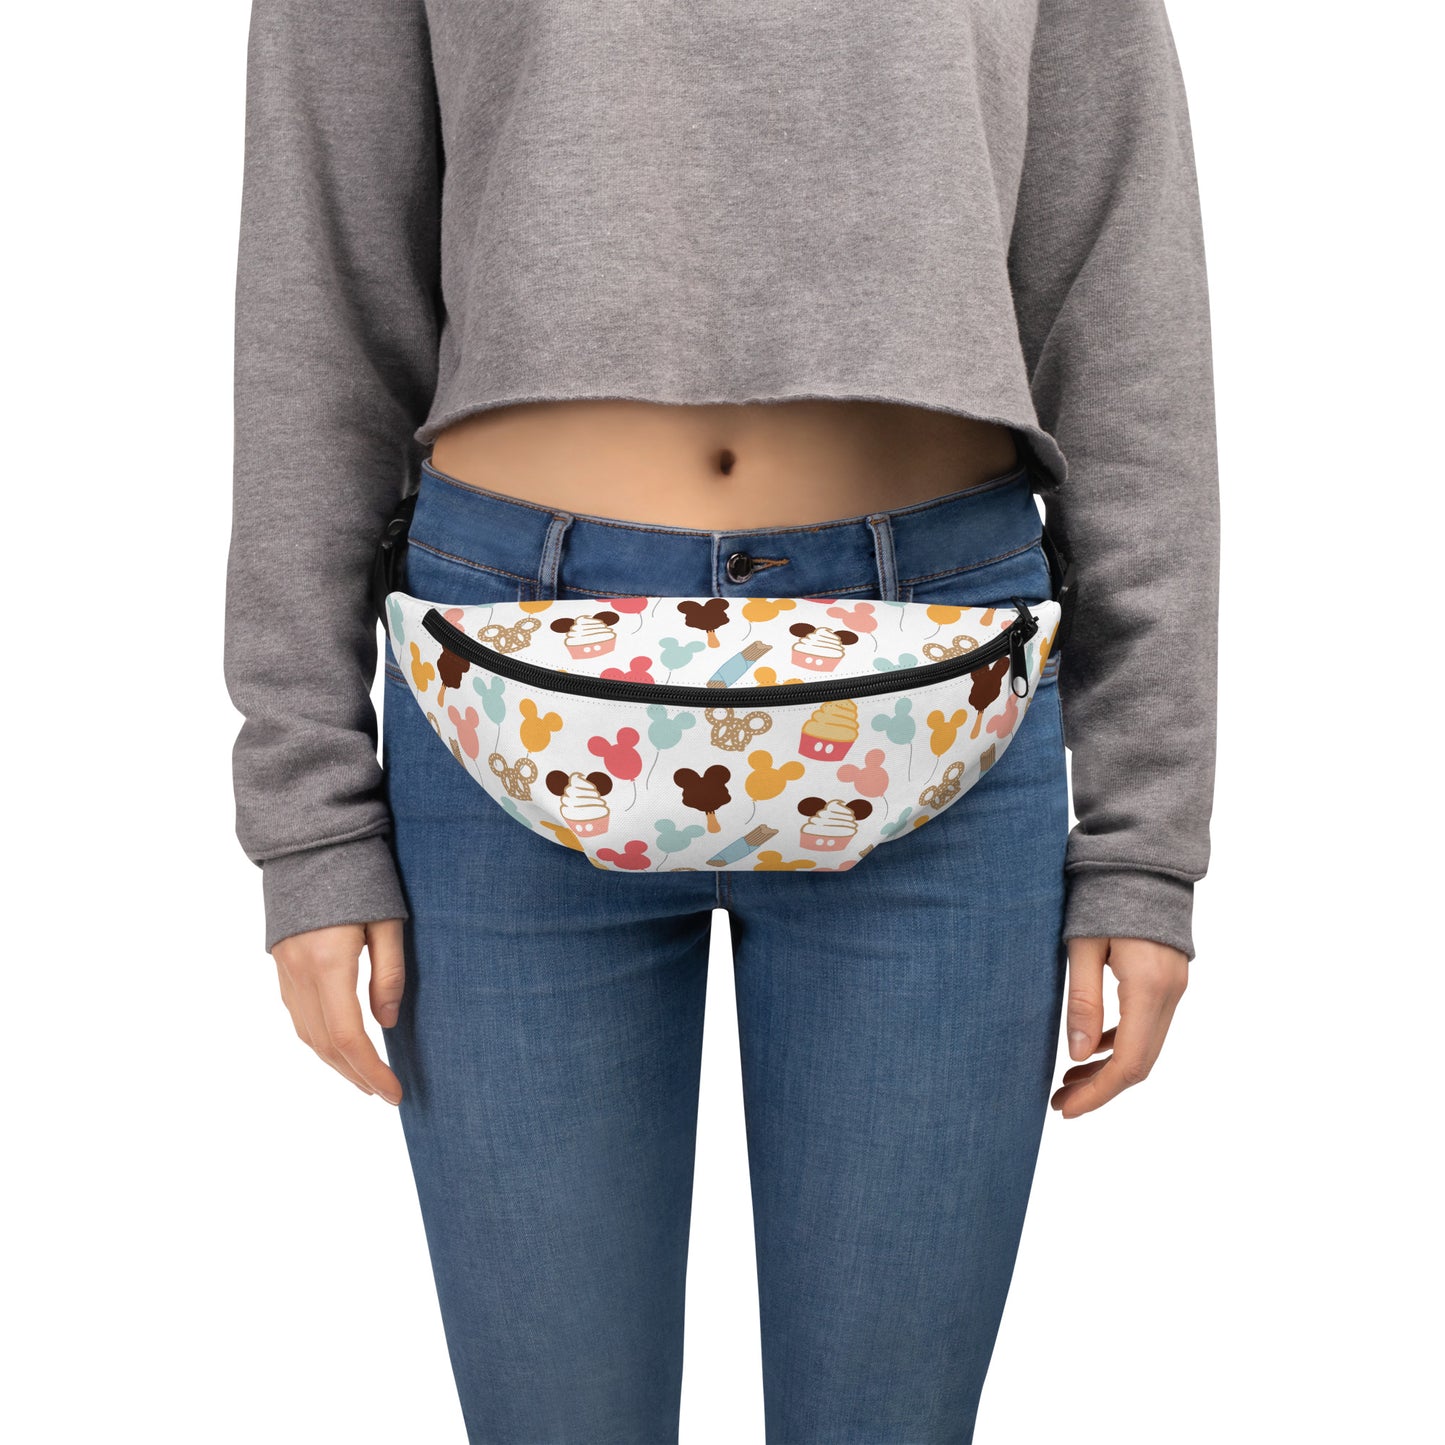 Fun Snack Fanny Pack